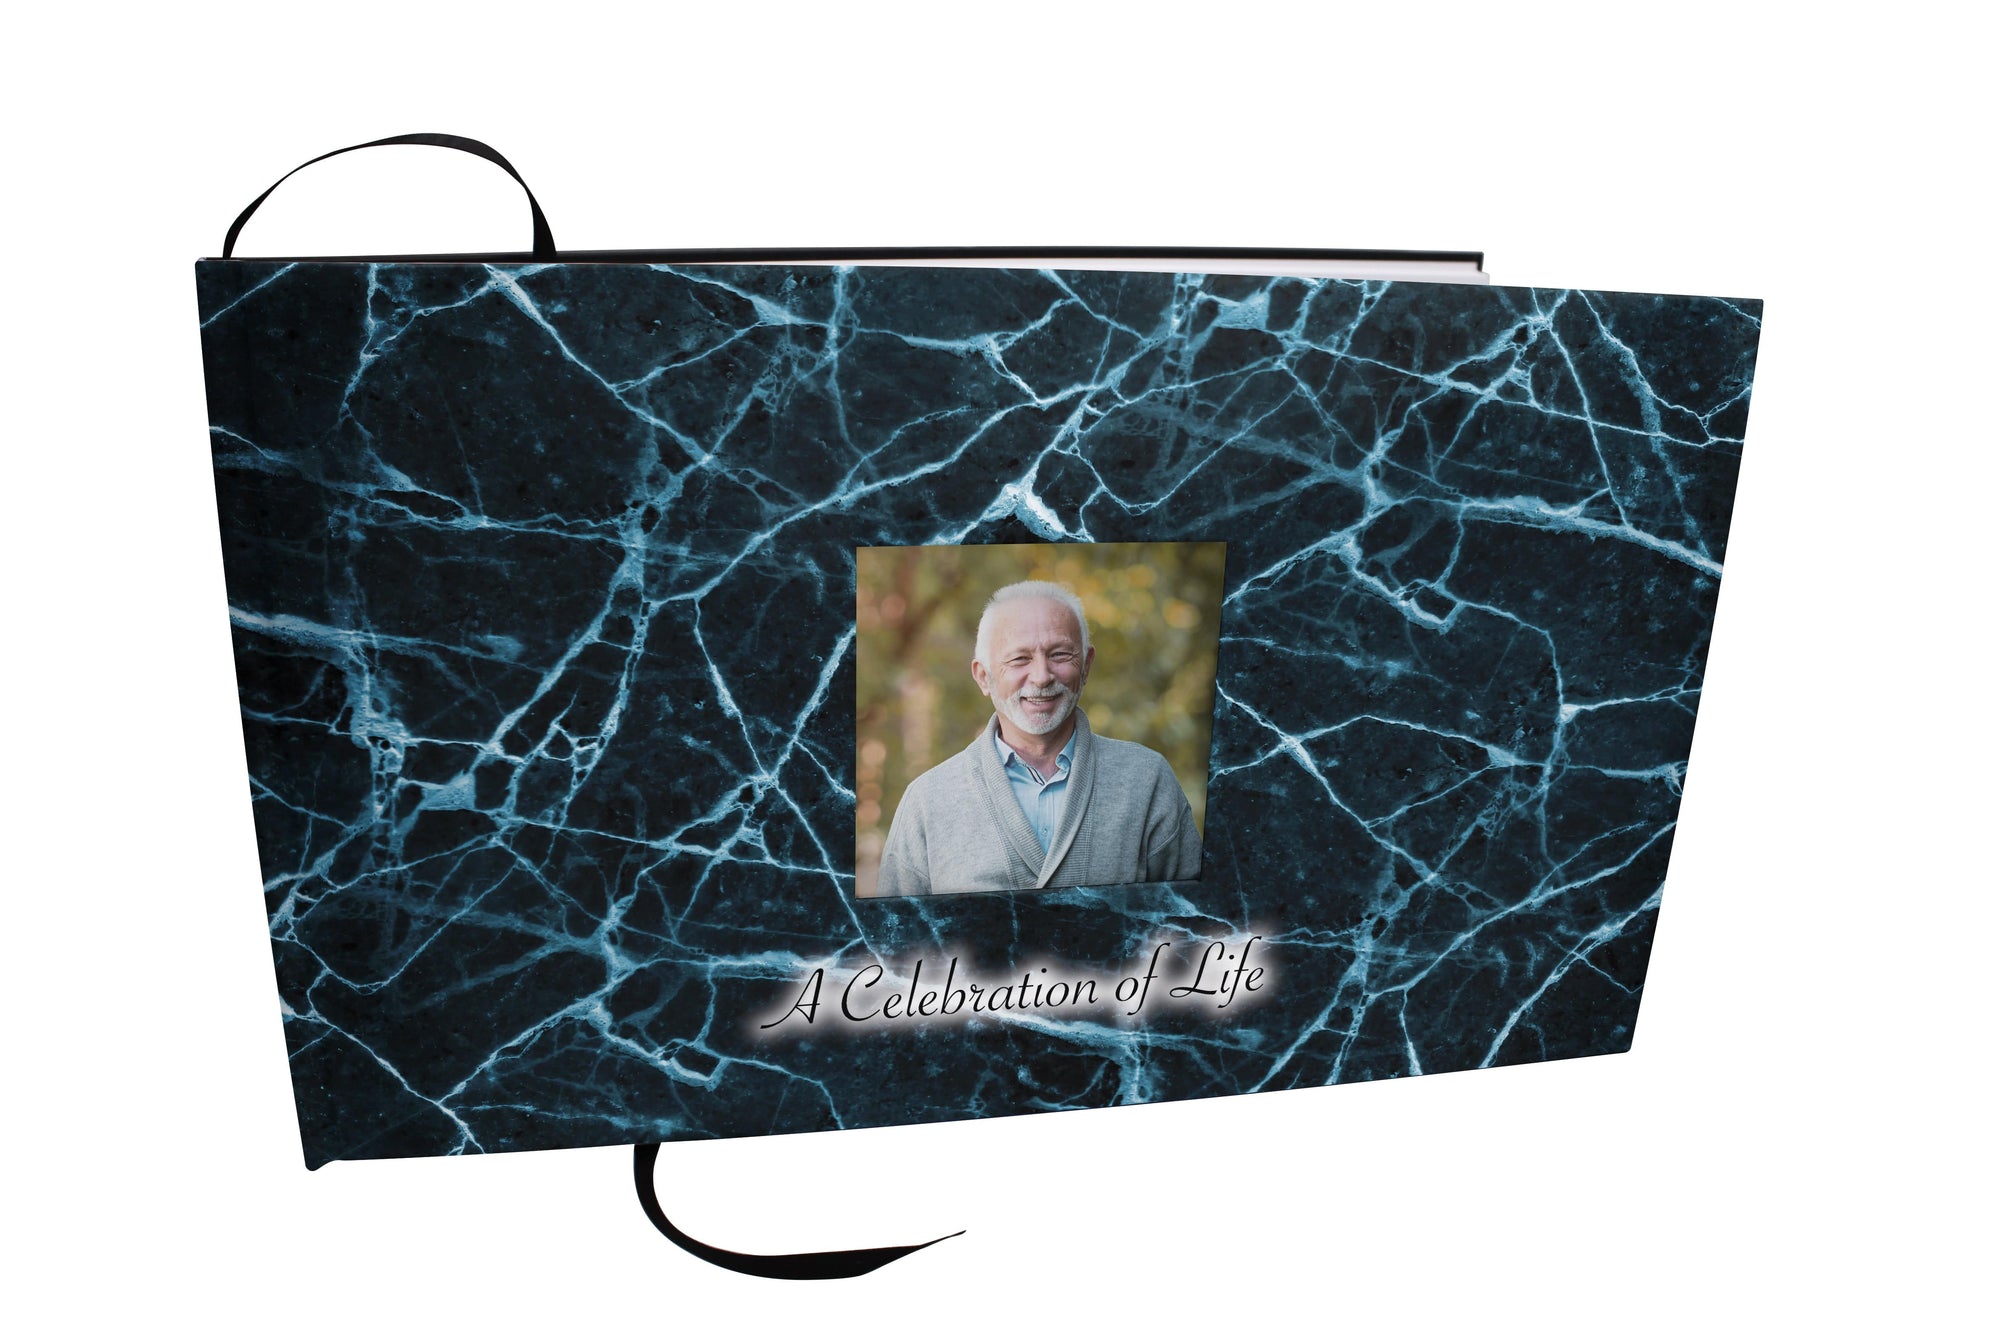 Commemorative Cremation Urns Teal Marble Matching Themed 'Celebration of Life' Guest Book for Funeral or Memorial Service